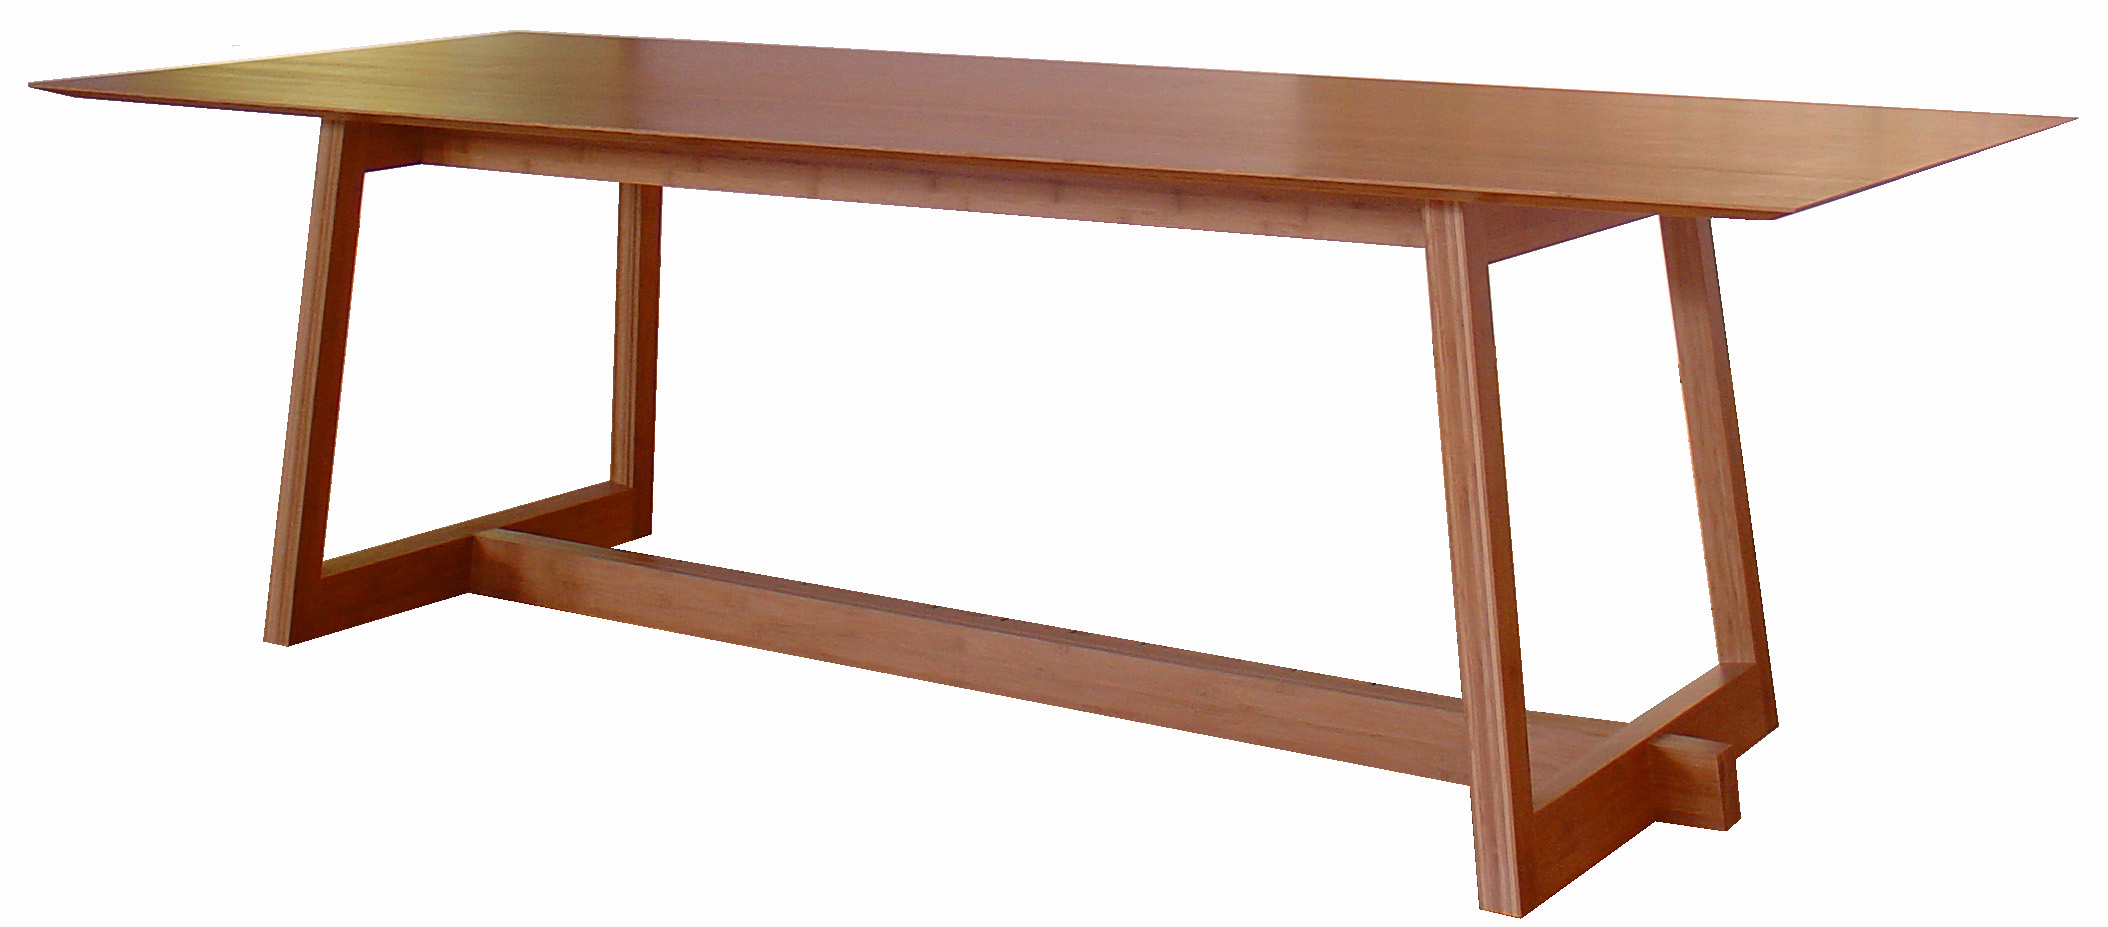 Bamboo Table Cropped White.jpg